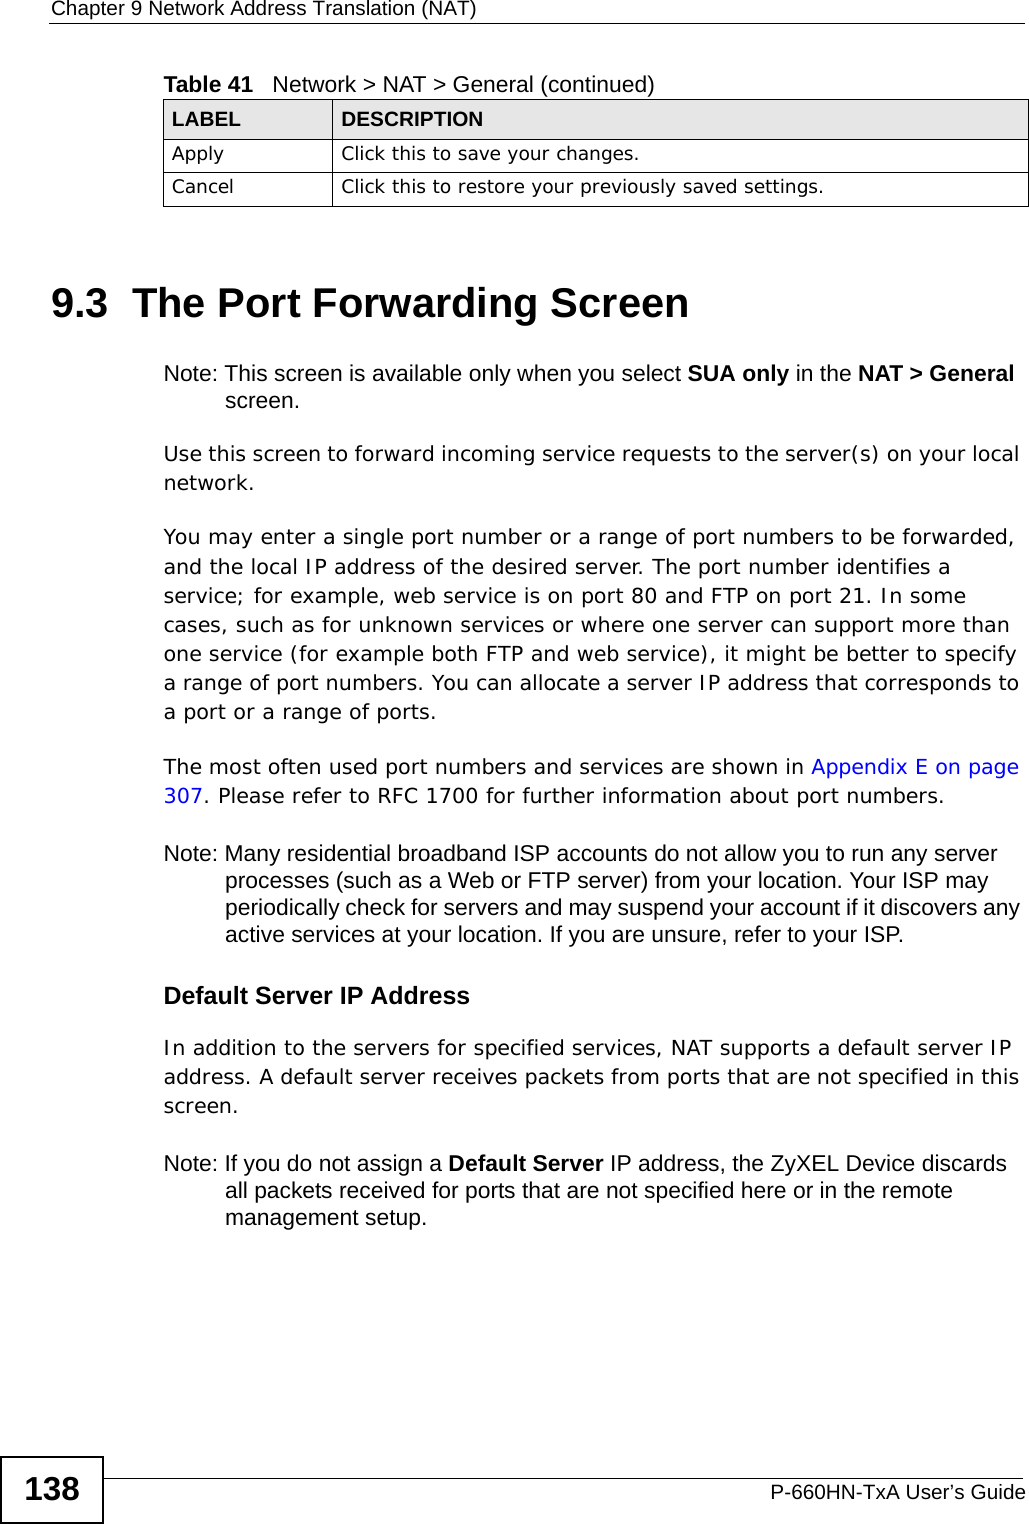 Chapter 9 Network Address Translation (NAT)P-660HN-TxA User’s Guide1389.3  The Port Forwarding ScreenNote: This screen is available only when you select SUA only in the NAT &gt; General screen.Use this screen to forward incoming service requests to the server(s) on your local network.You may enter a single port number or a range of port numbers to be forwarded, and the local IP address of the desired server. The port number identifies a service; for example, web service is on port 80 and FTP on port 21. In some cases, such as for unknown services or where one server can support more than one service (for example both FTP and web service), it might be better to specify a range of port numbers. You can allocate a server IP address that corresponds to a port or a range of ports.The most often used port numbers and services are shown in Appendix E on page 307. Please refer to RFC 1700 for further information about port numbers. Note: Many residential broadband ISP accounts do not allow you to run any server processes (such as a Web or FTP server) from your location. Your ISP may periodically check for servers and may suspend your account if it discovers any active services at your location. If you are unsure, refer to your ISP.Default Server IP AddressIn addition to the servers for specified services, NAT supports a default server IP address. A default server receives packets from ports that are not specified in this screen.Note: If you do not assign a Default Server IP address, the ZyXEL Device discards all packets received for ports that are not specified here or in the remote management setup.Apply Click this to save your changes.Cancel Click this to restore your previously saved settings.Table 41   Network &gt; NAT &gt; General (continued)LABEL DESCRIPTION